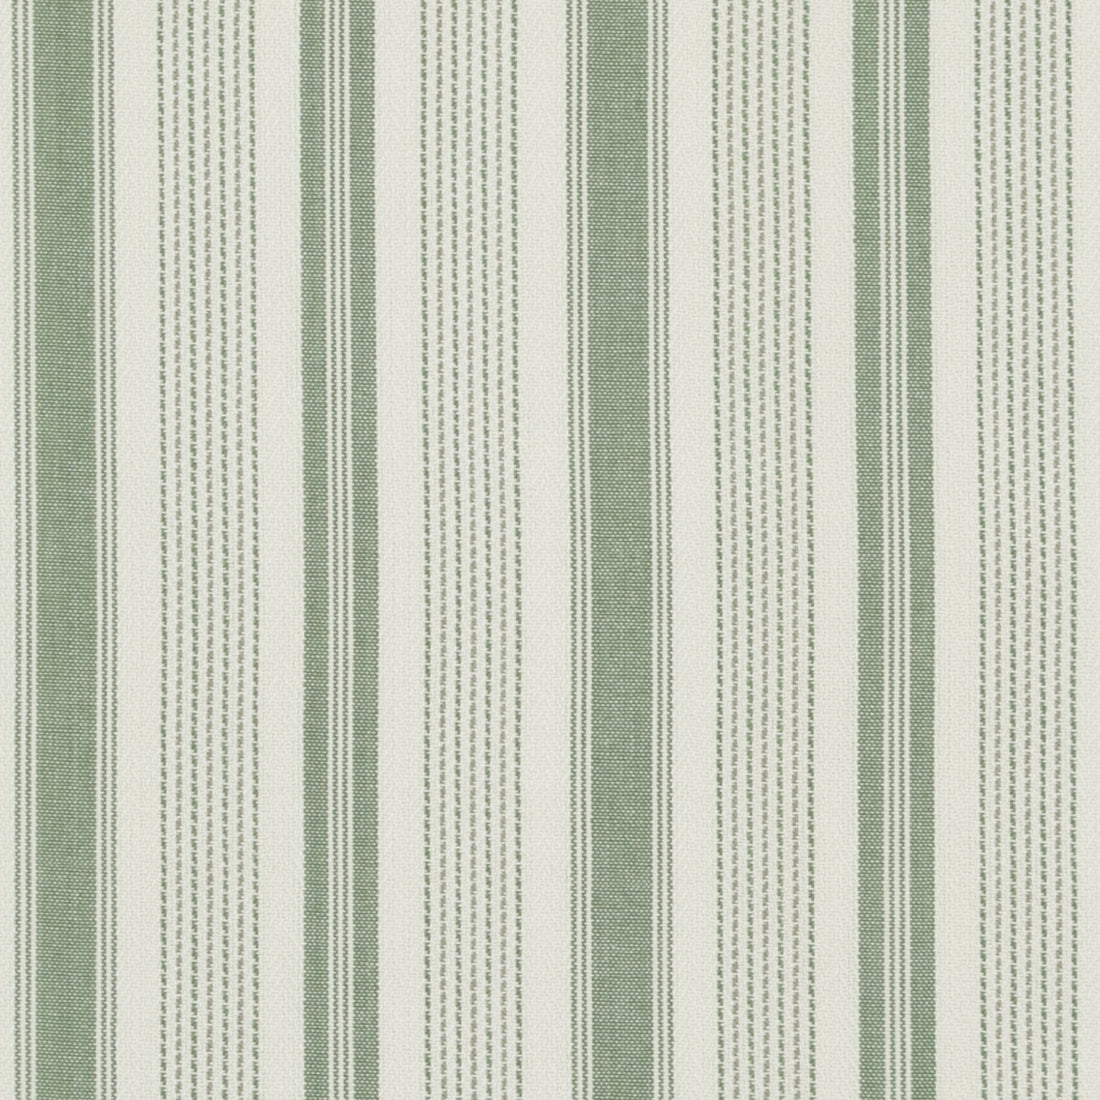 Purbeck Stripe fabric in green color - pattern PF50507.5.0 - by Baker Lifestyle in the Bridport collection